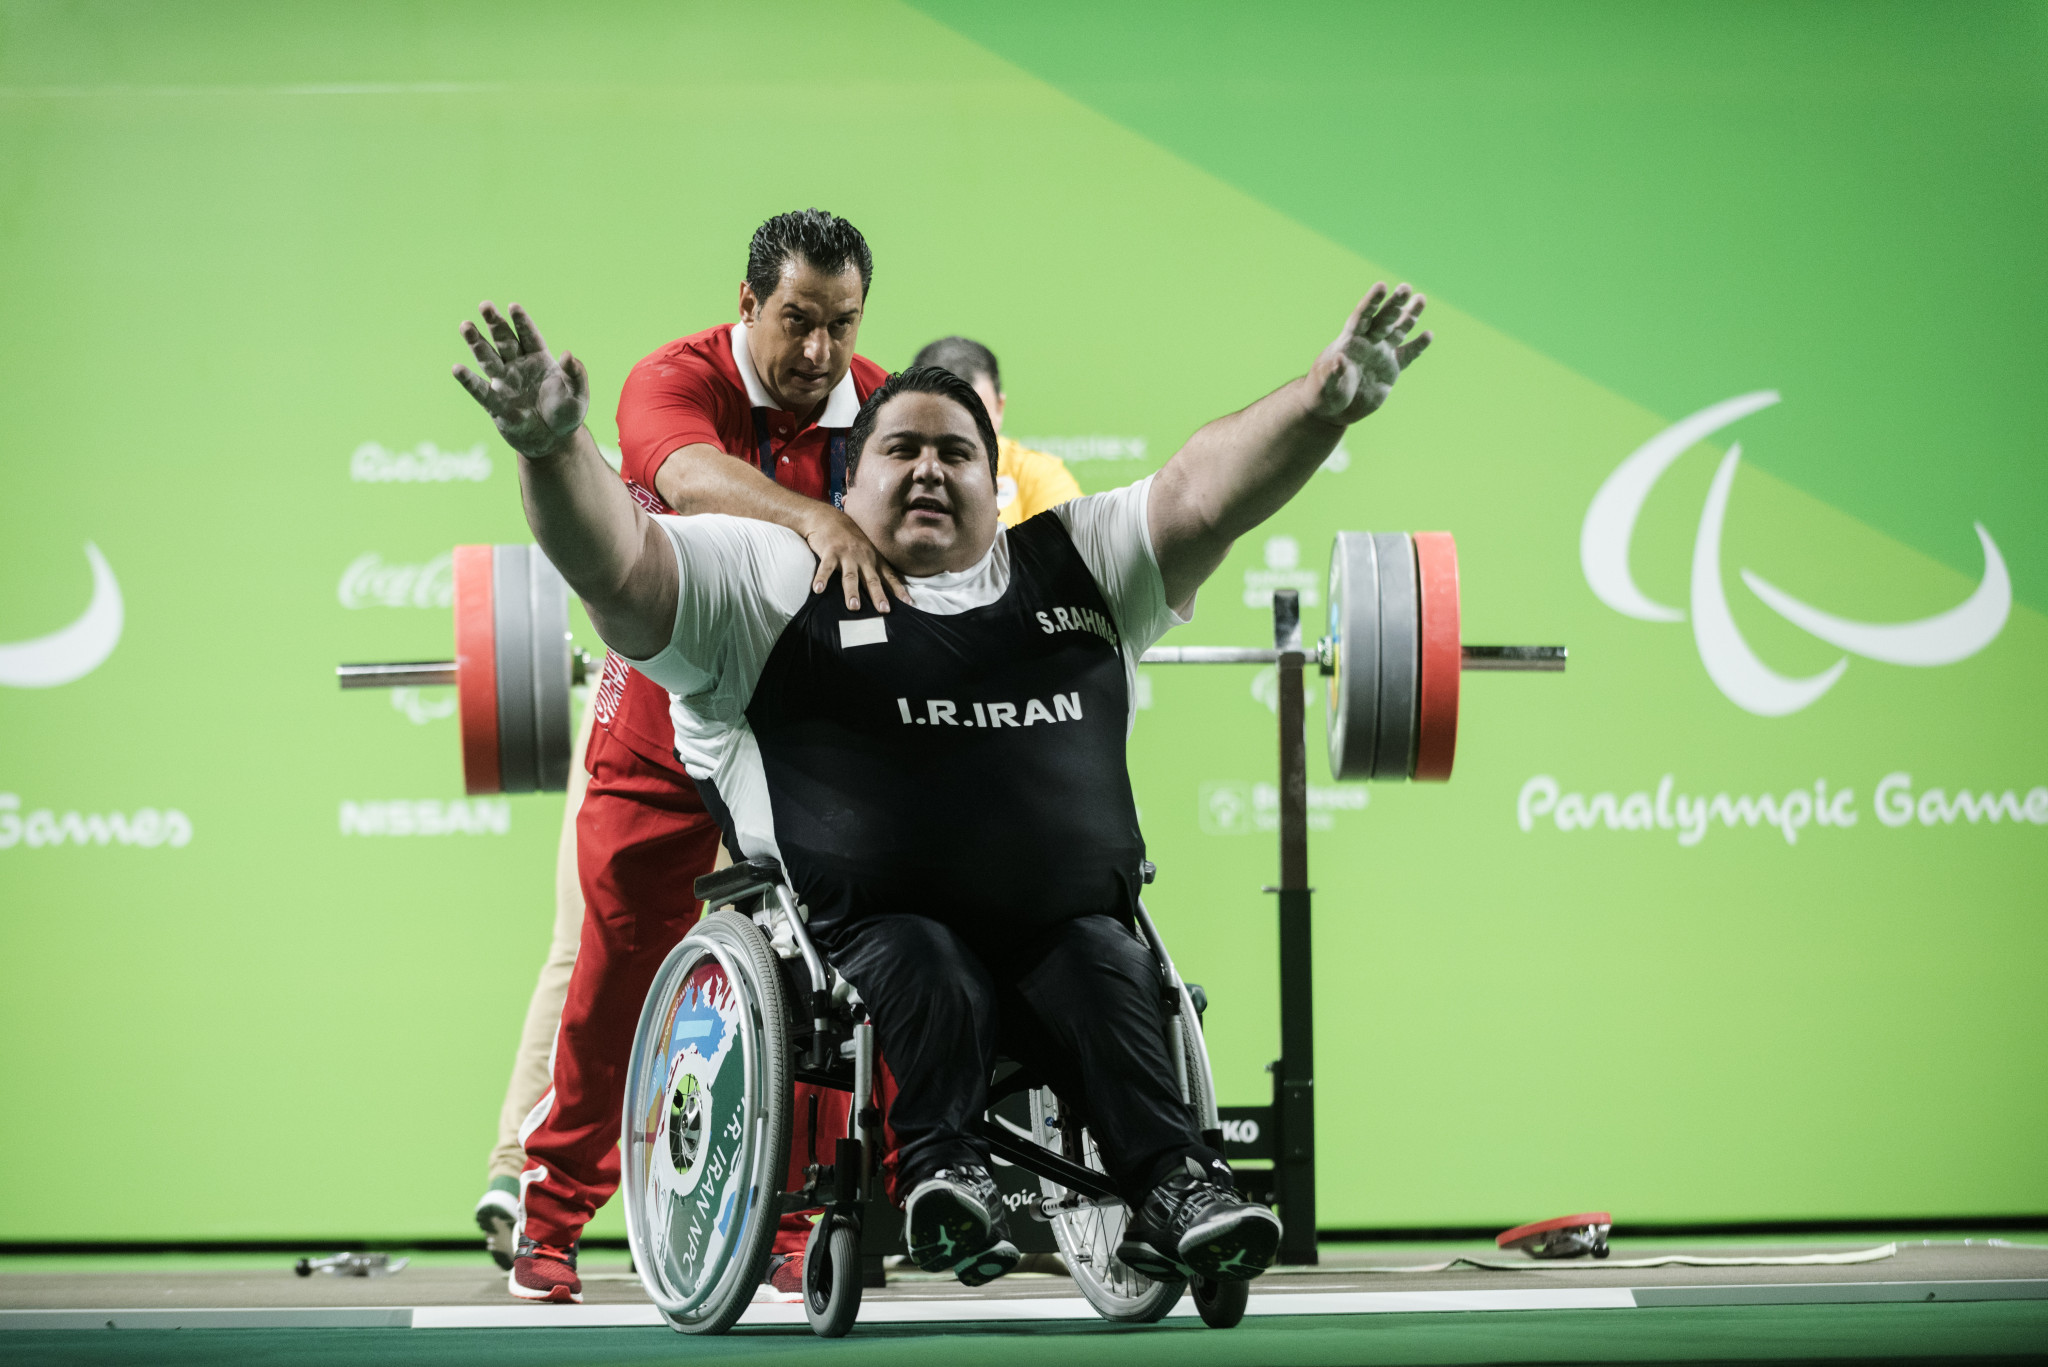 World's strongest Paralympian among field for Asia-Oceania Open Powerlifting Championships